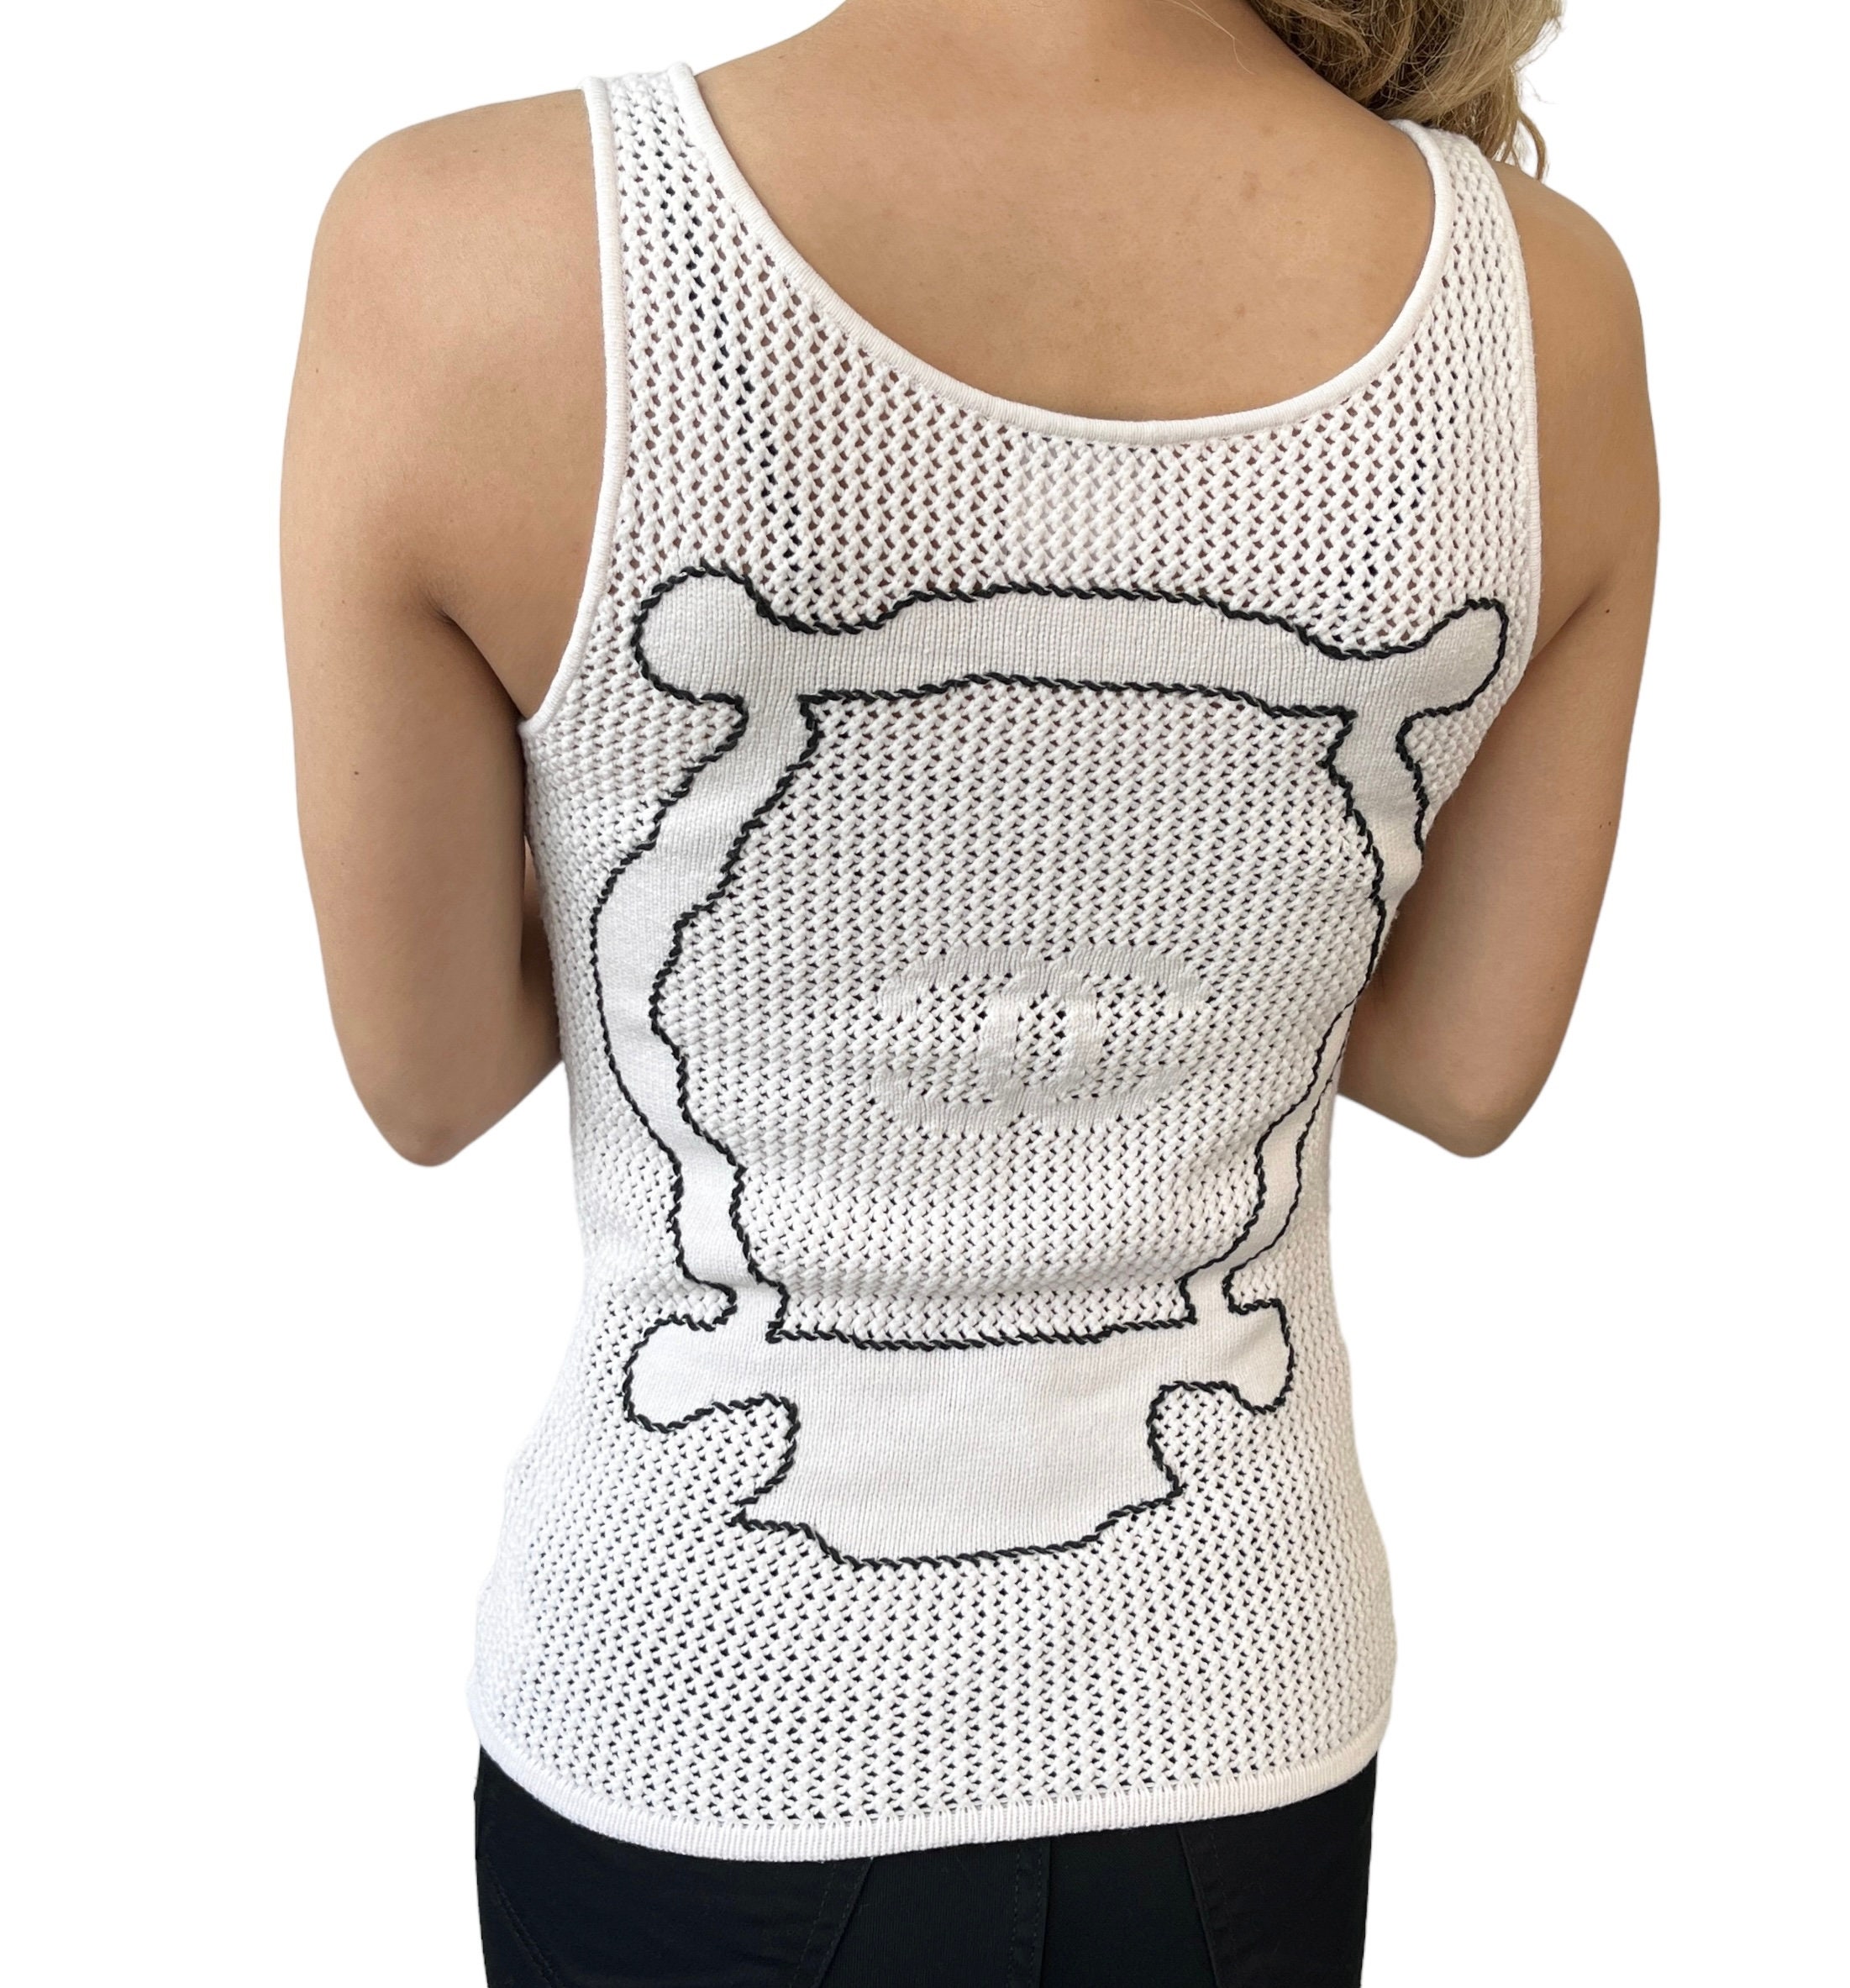 CHANEL Tank Tops for Women for sale